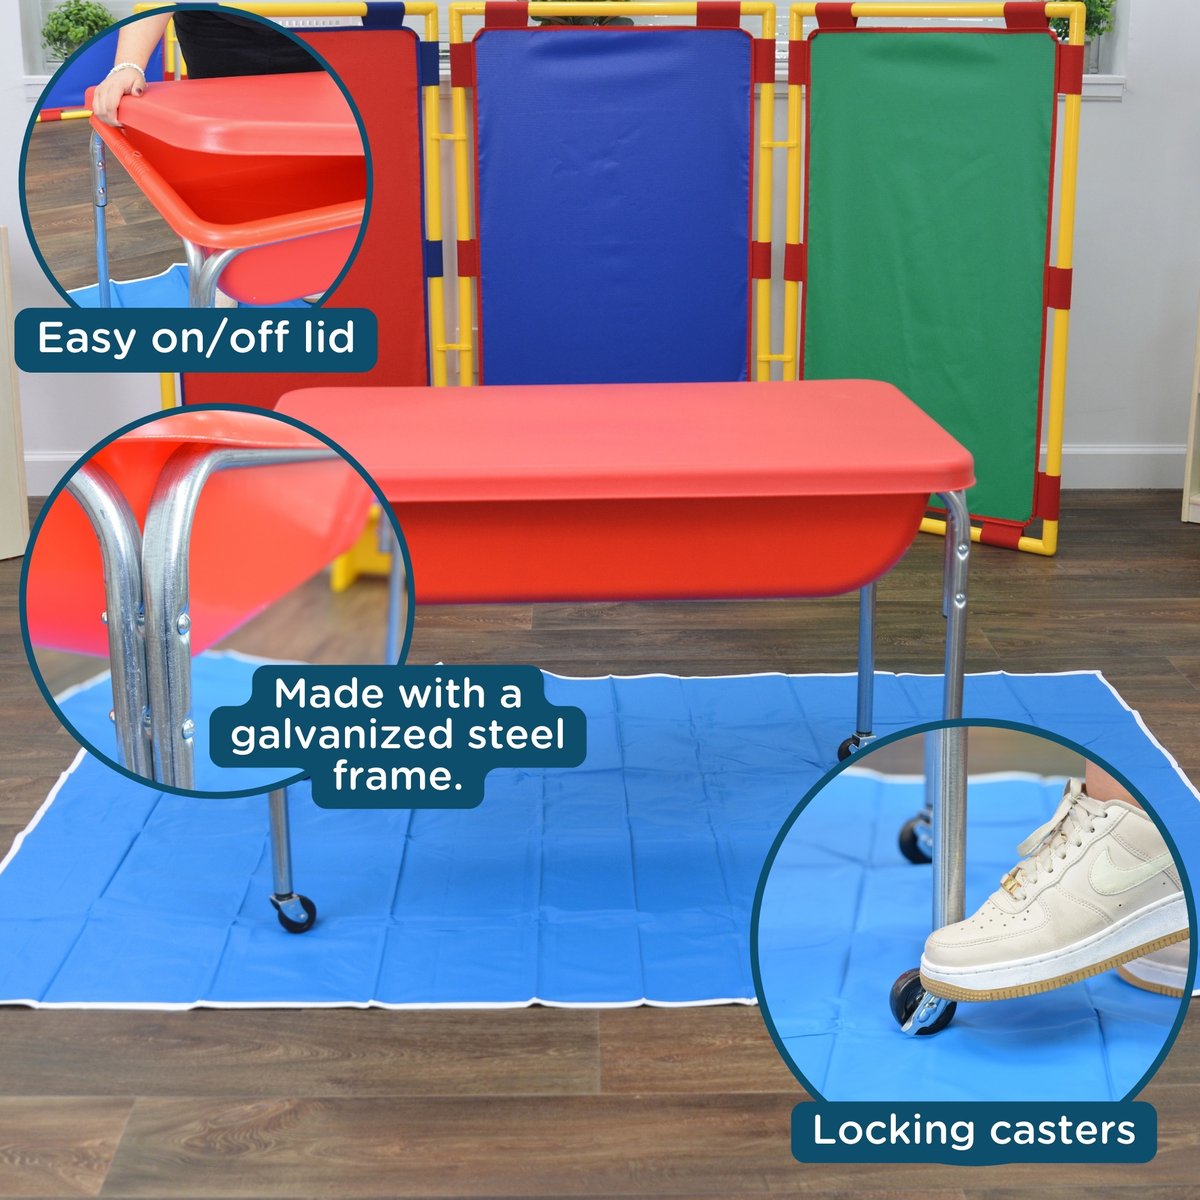 Immerse yourself in a world of fun and learning with our Children's Factory Large Sensory Table. Perfect for unearthing creativity and curiosity, one splash at a time! 💦 #SensoryPlay #PlayAndLearn #childrensfactory